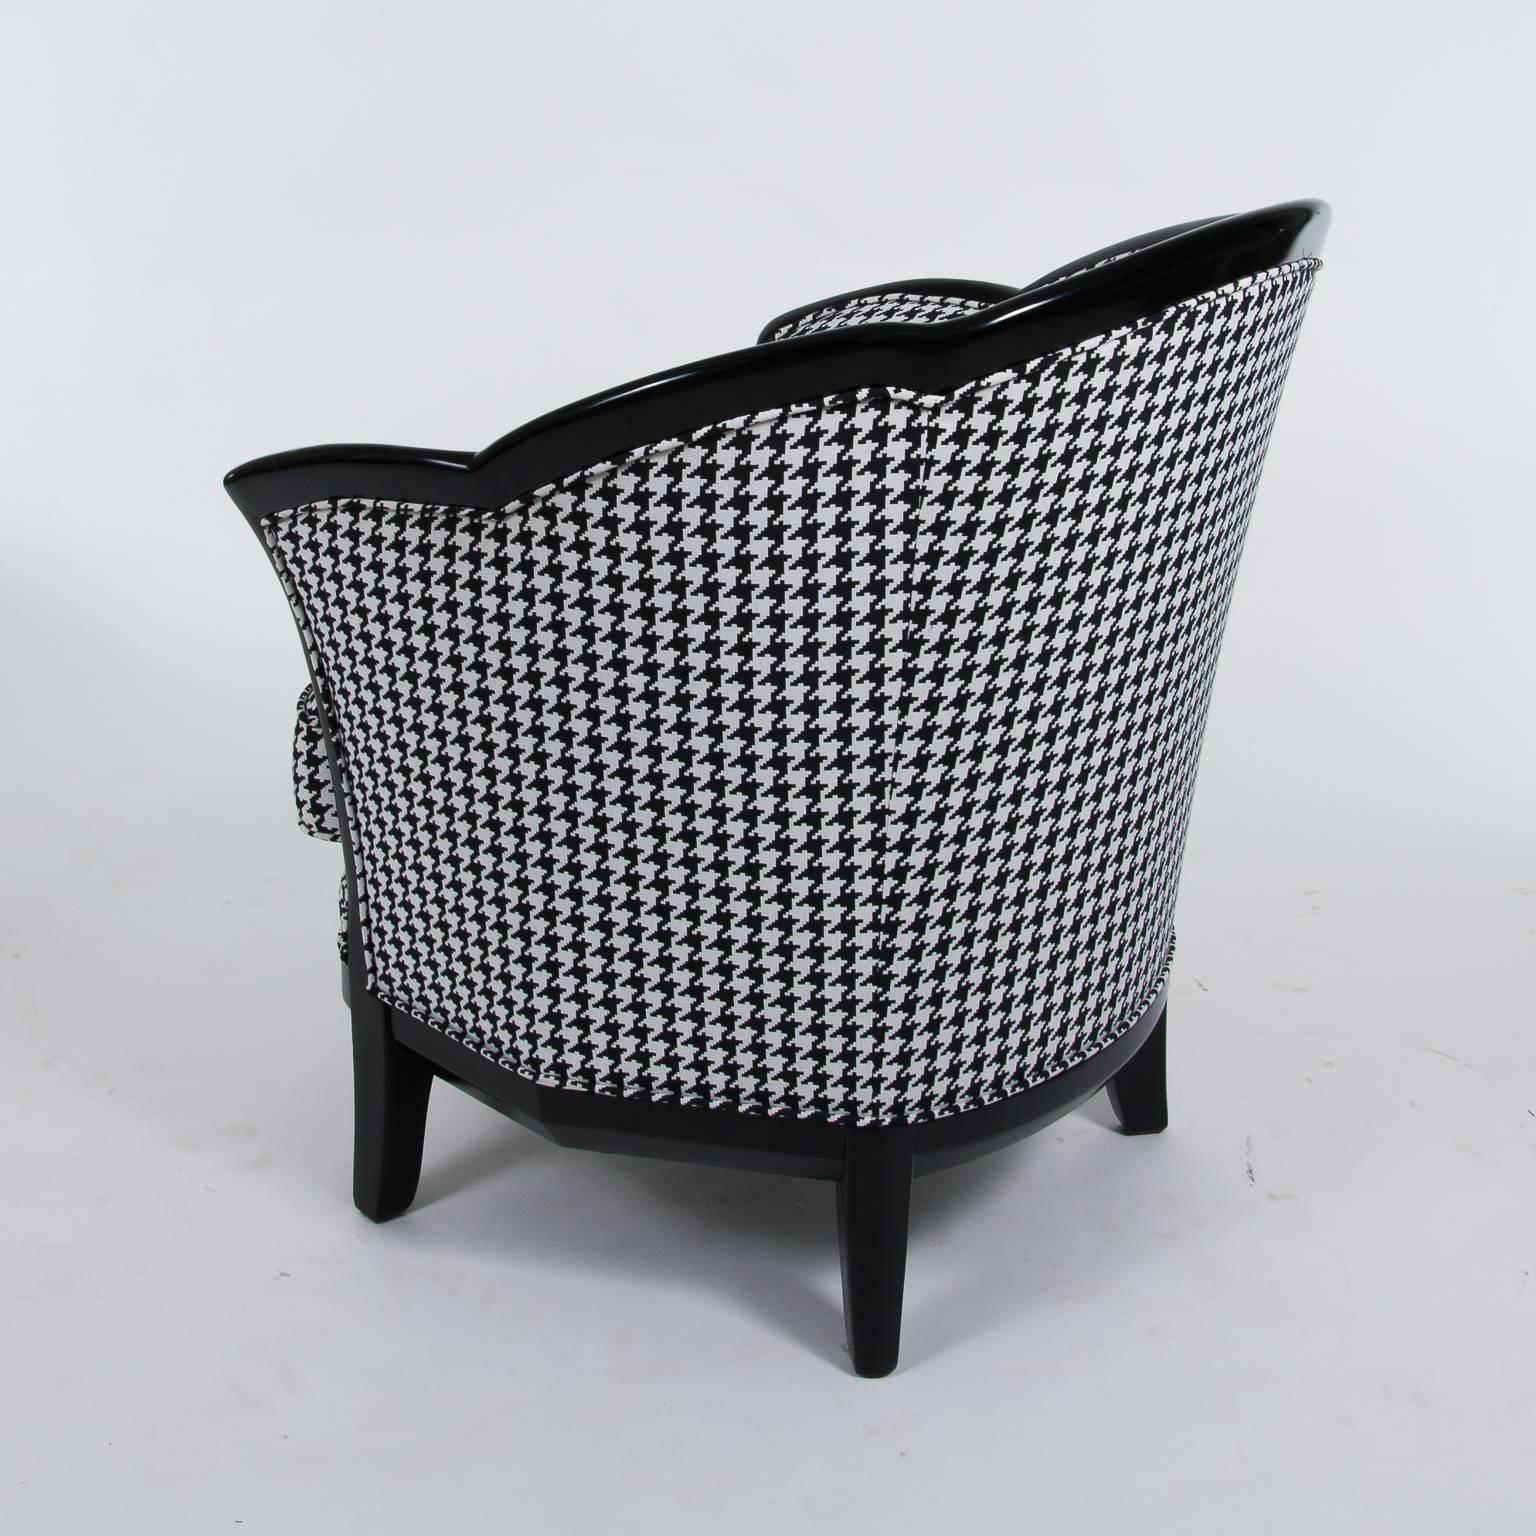 Ebonized Two French Art Deco Club Chairs, France 1930s in Black-White Fabric Upholstery